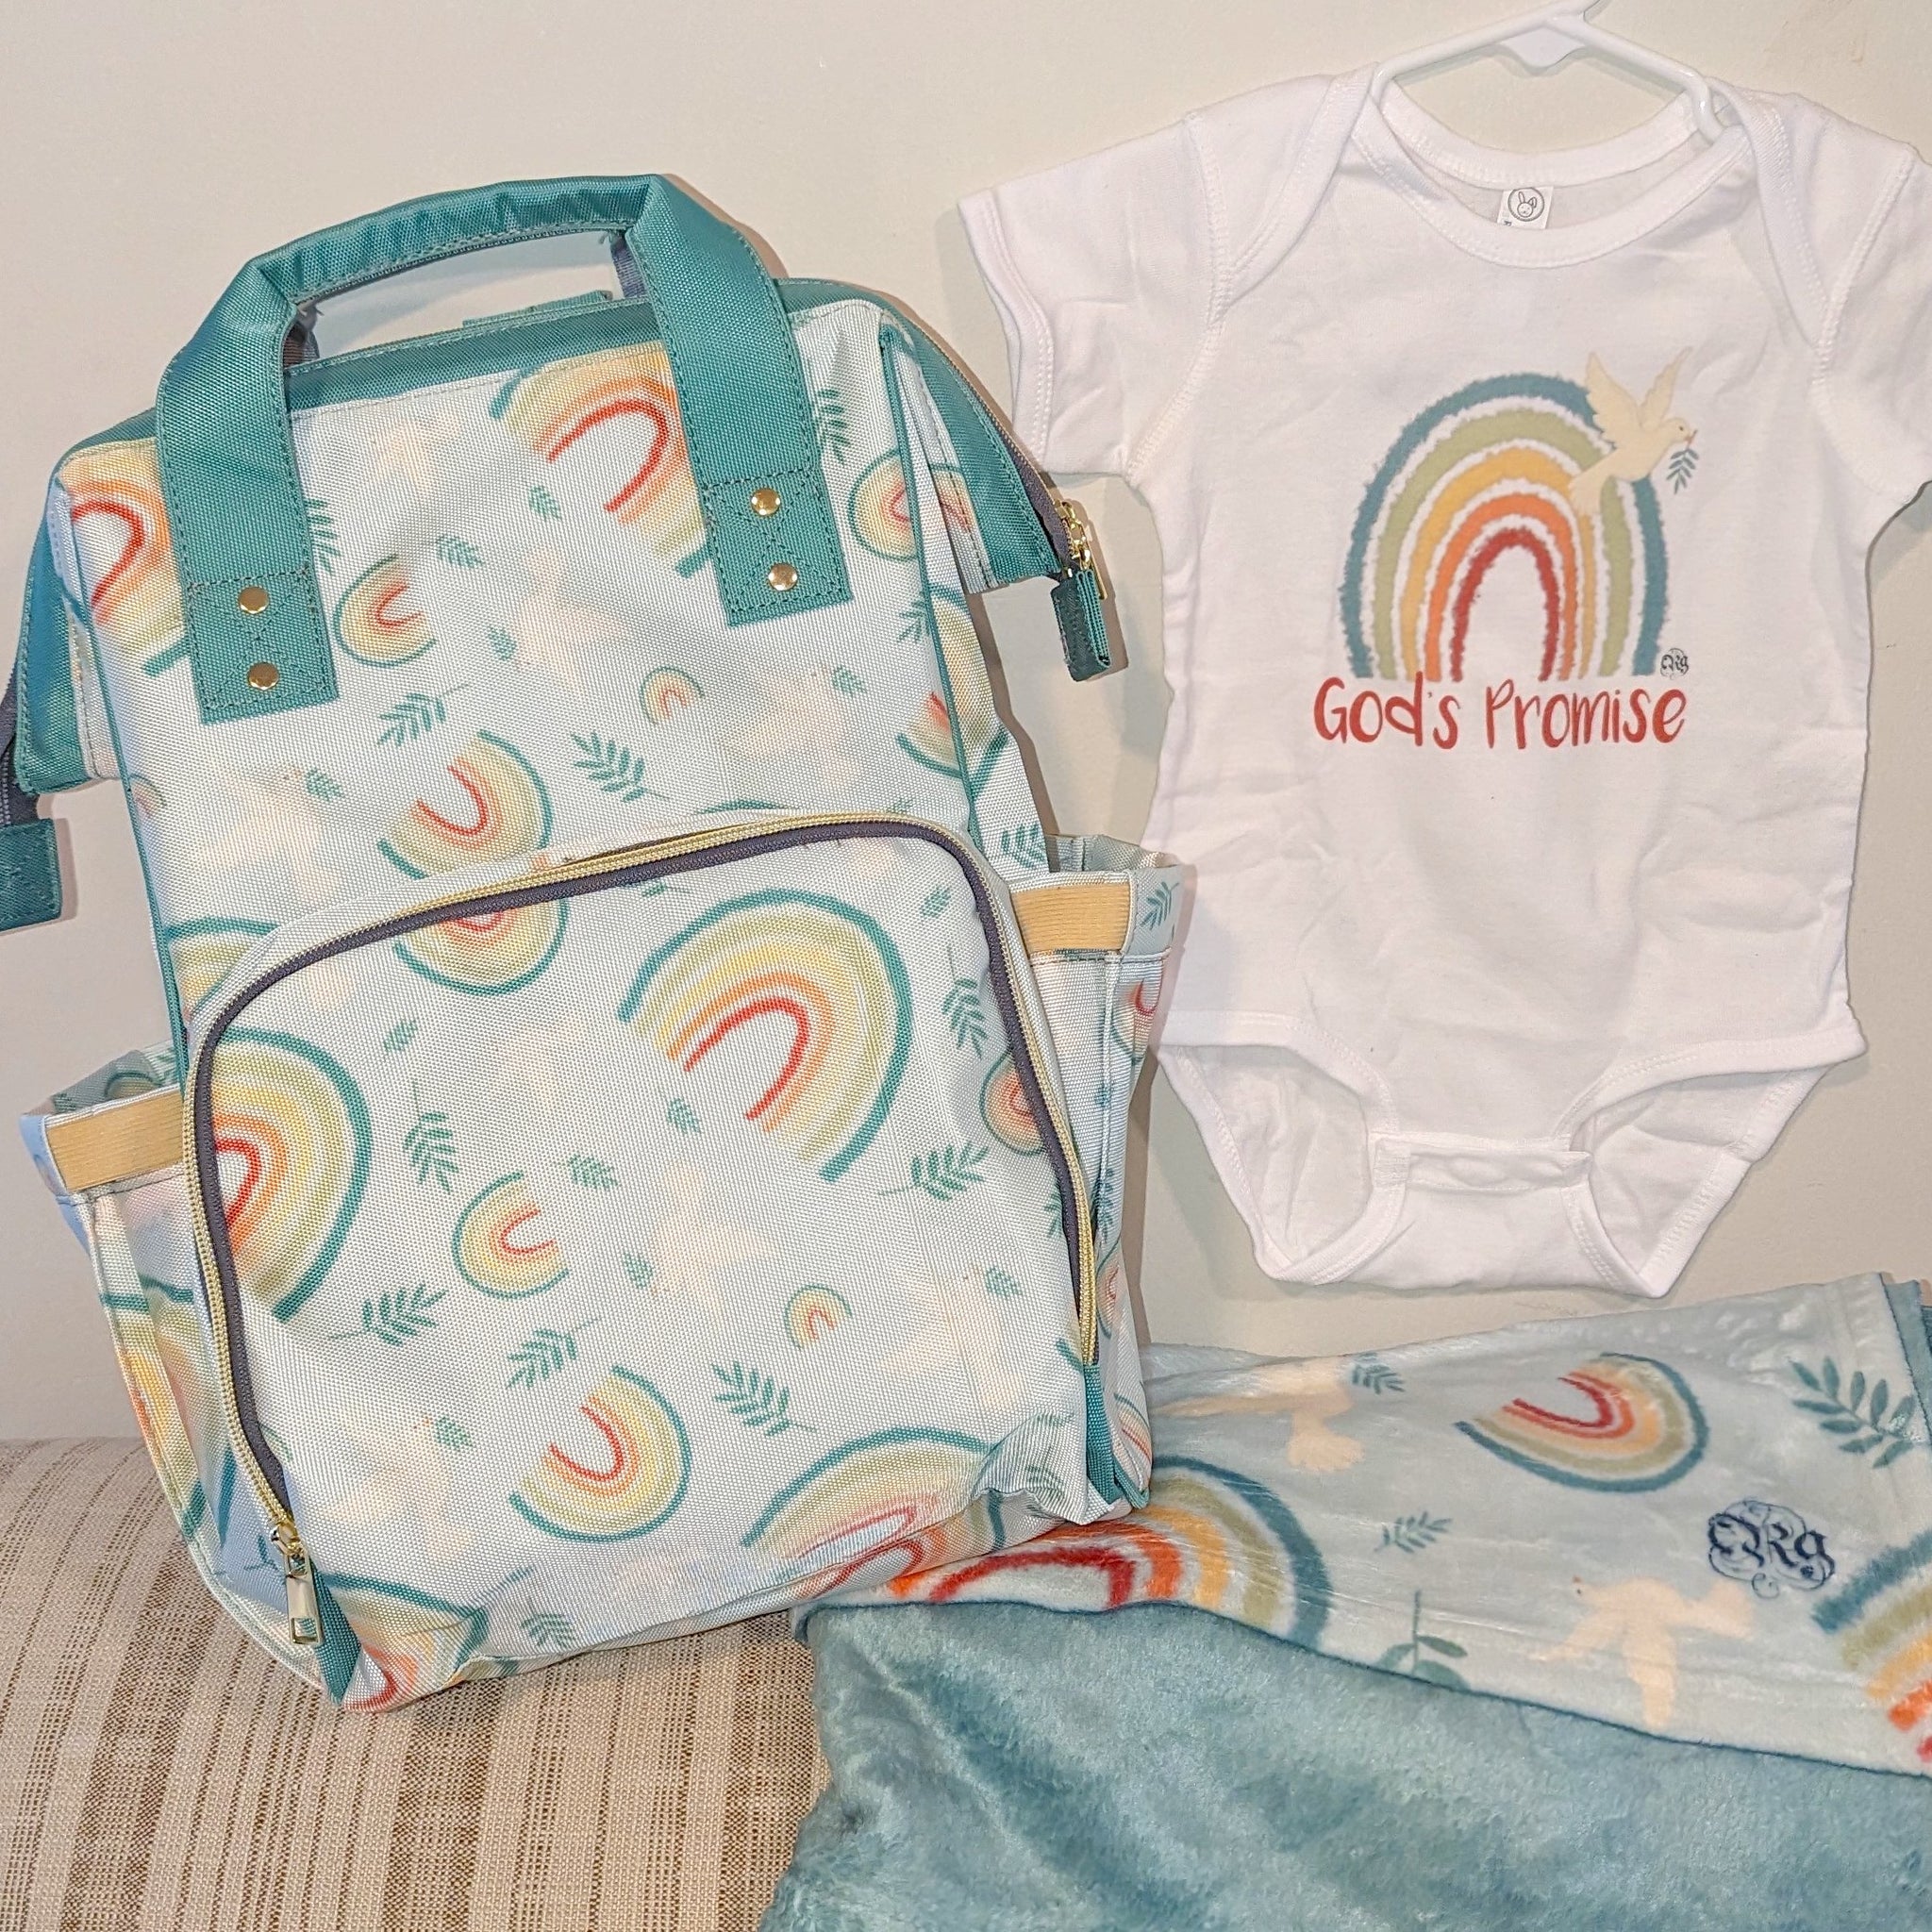 Catholic diaper bag, blanket, and bodysuit featuring God's Promise design based on Noah's Ark with rainbows, doves, and olive branches